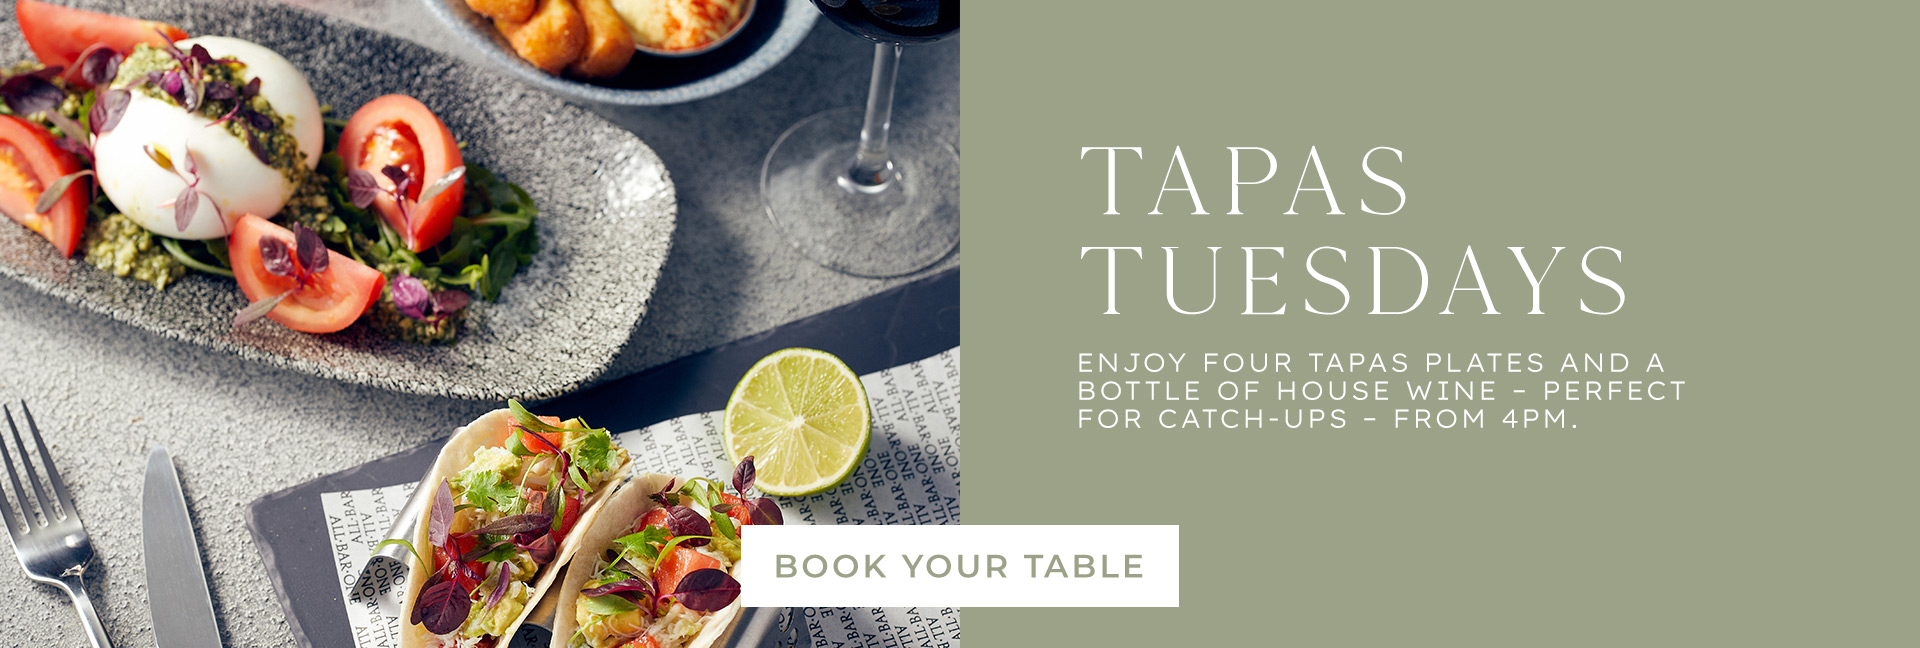 Tapas Tuesday at All Bar One Waterloo - Book now